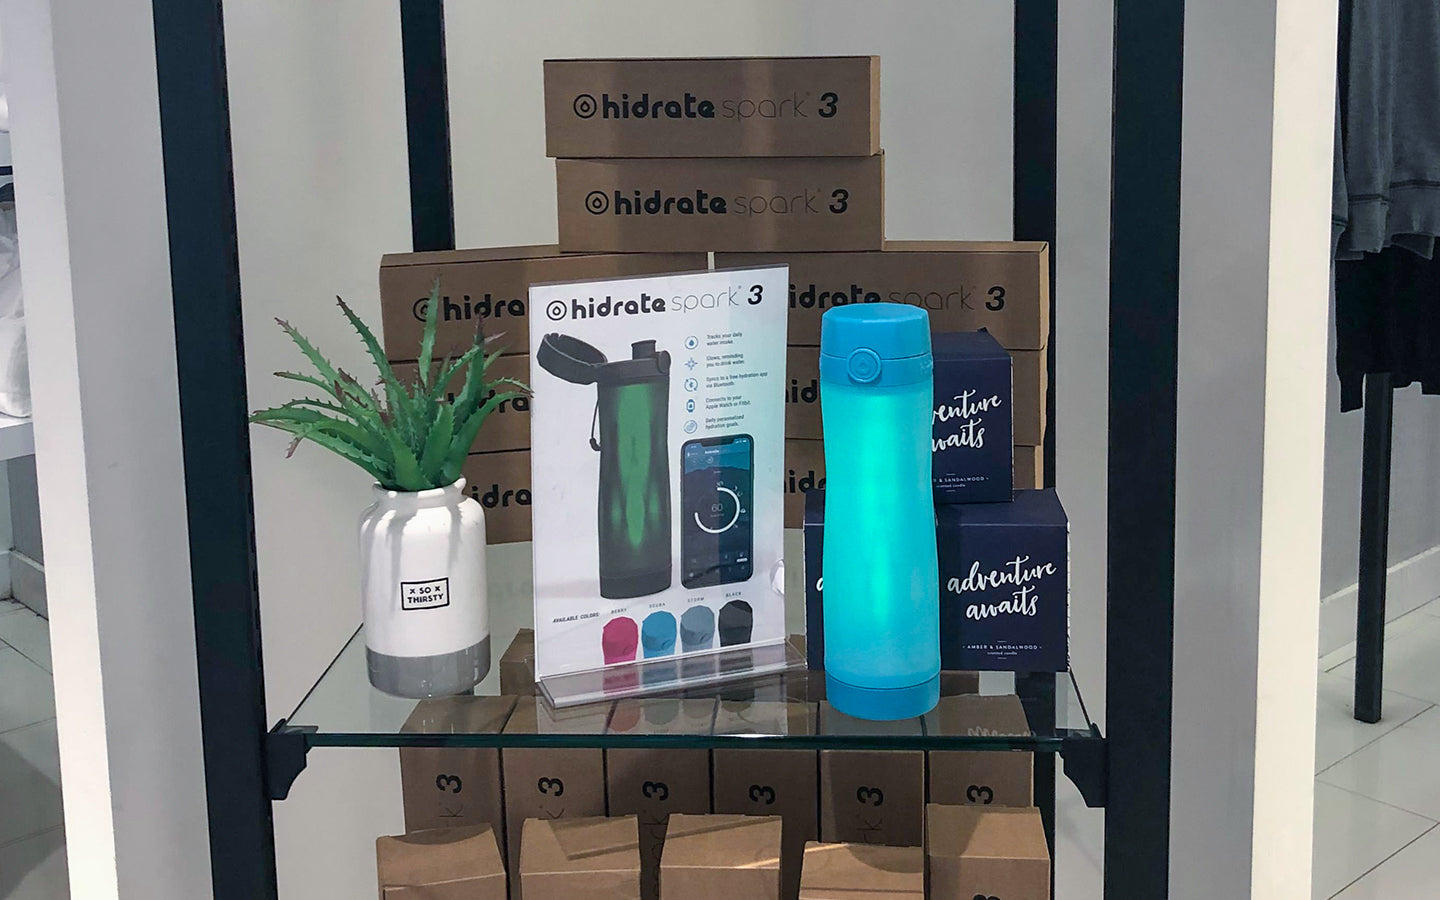 Hidrate Spark 3 Bluetooth Smart Water Bottle on display and for sale at the Herald Square Macy's